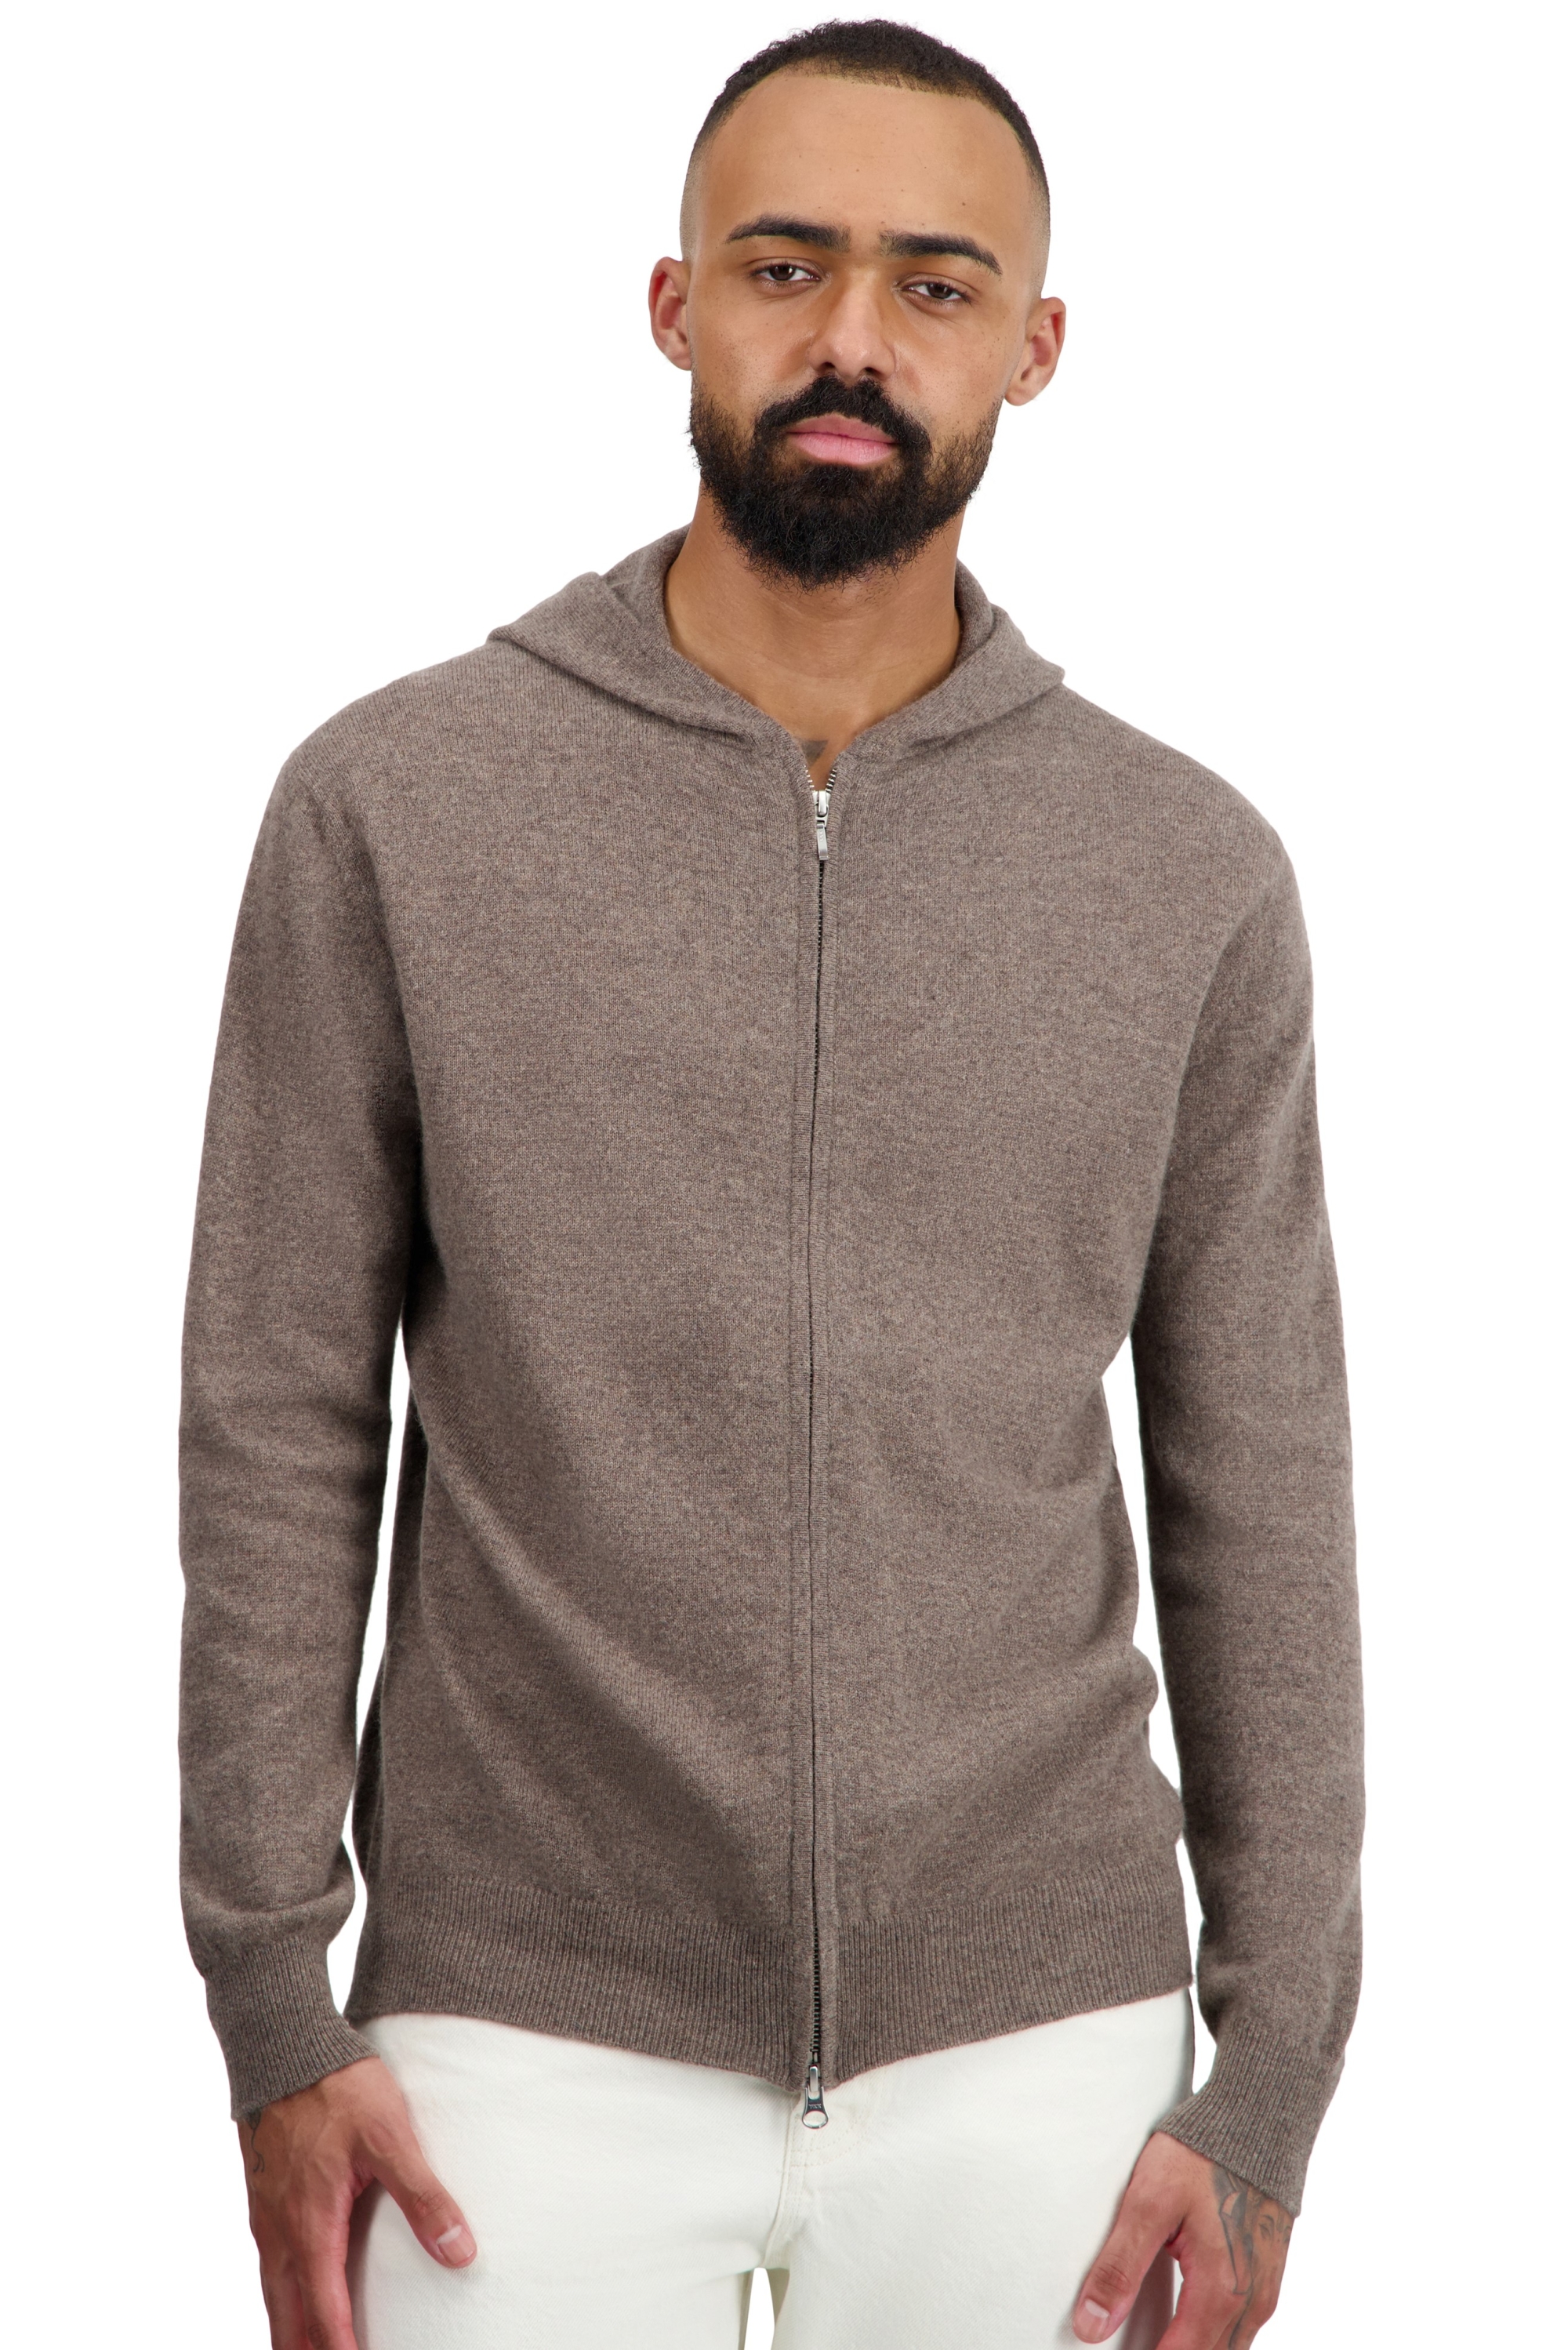 Cashmere men basic sweaters at low prices taboo first otter l